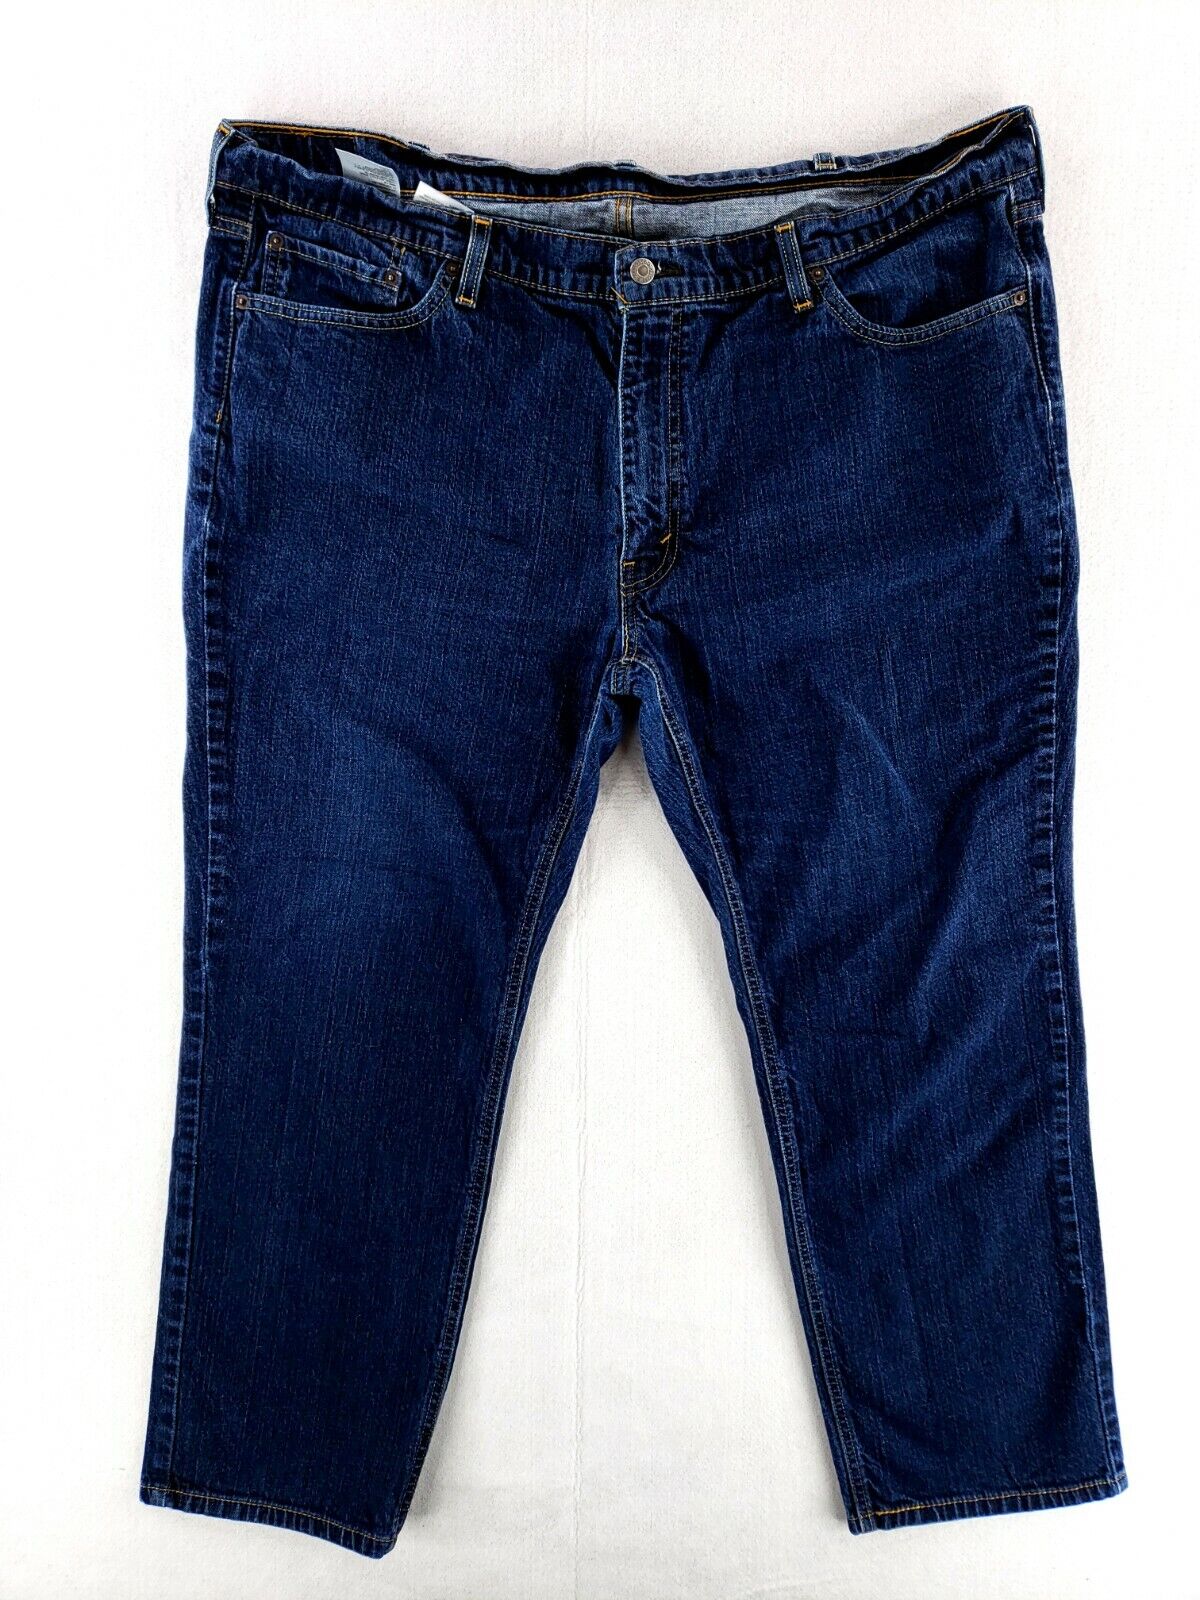 Levi's 541 Athletic Taper 46x32 Altered Wash Jeans 46x29 Max 64% Japan's largest assortment OFF Dark